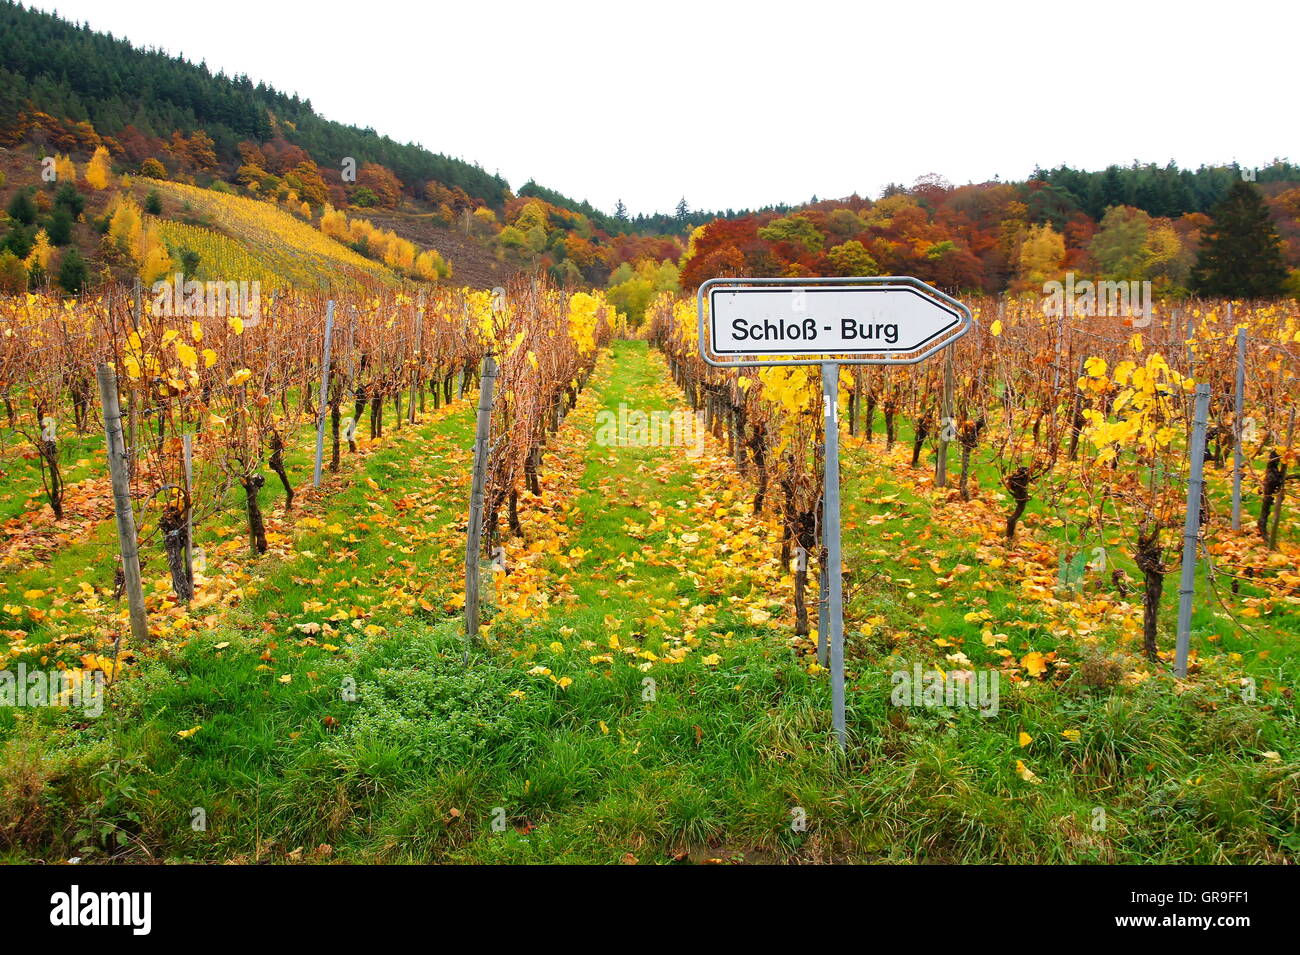 Colorful Vineyard In Autumn Near Burg On The Moselle With Shield Schloss Burg Stock Photo